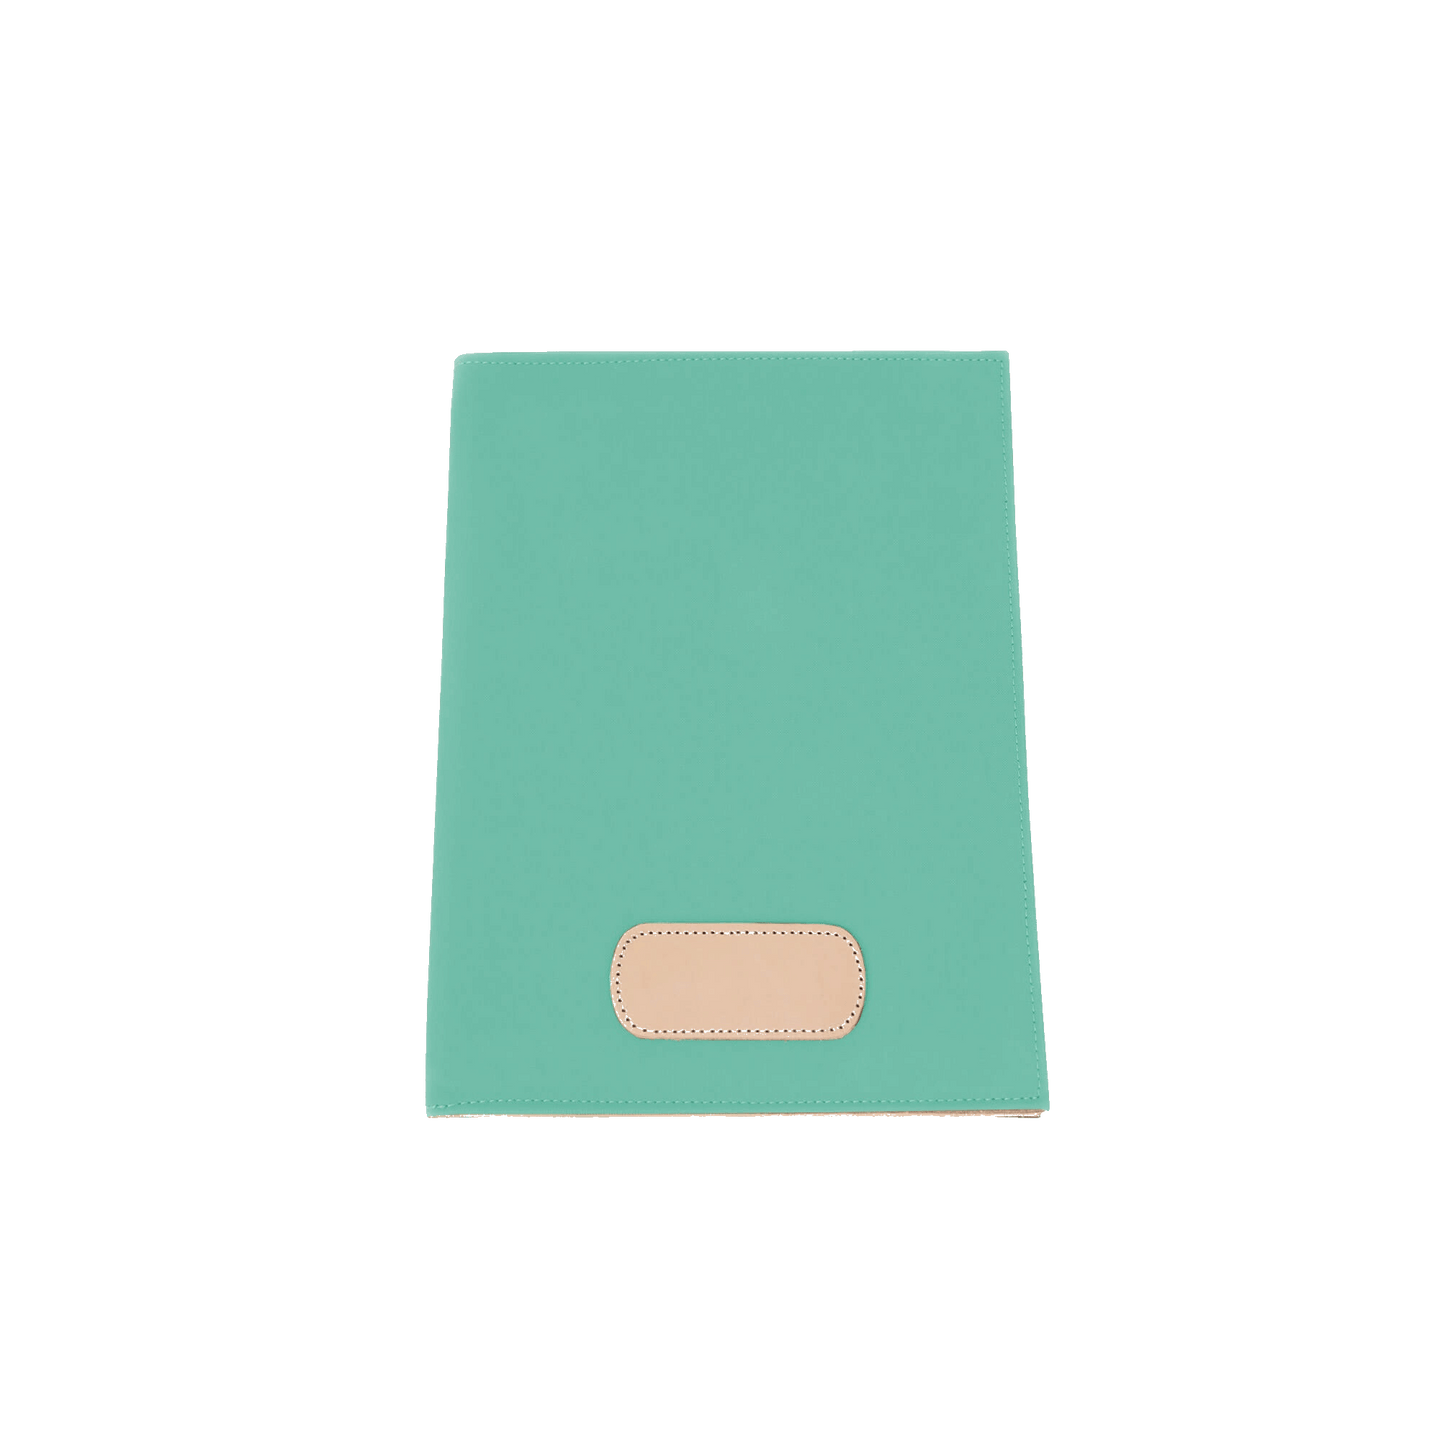 Executive Folder - Mint Coated Canvas Front Angle in Color 'Mint Coated Canvas'